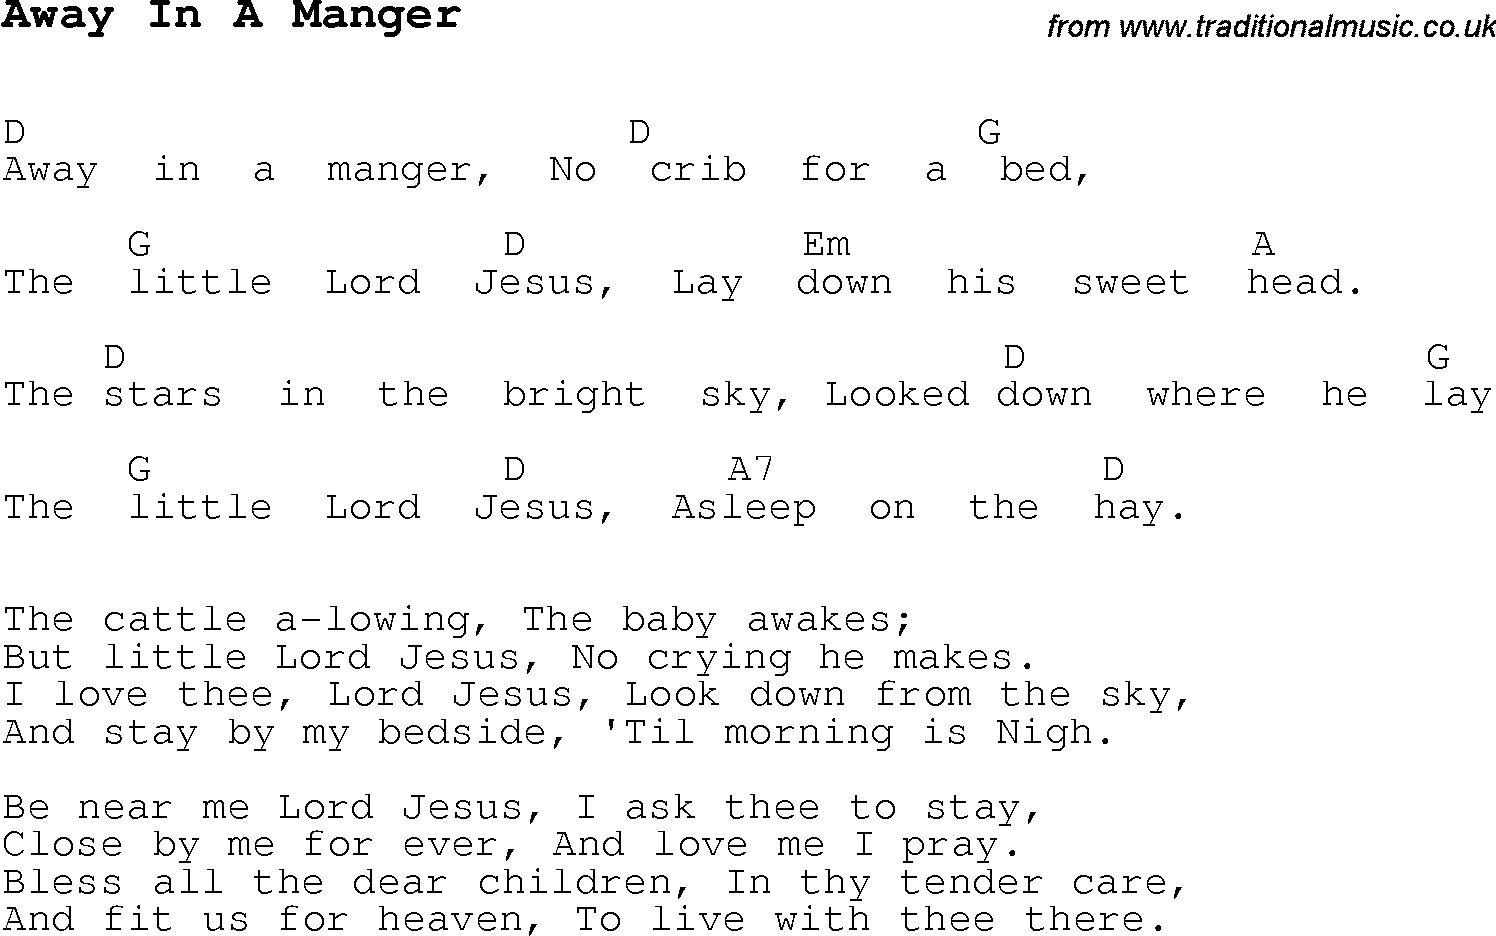 Christmas Songs and Carols, lyrics with chords for guitar banjo for Away In A Manger